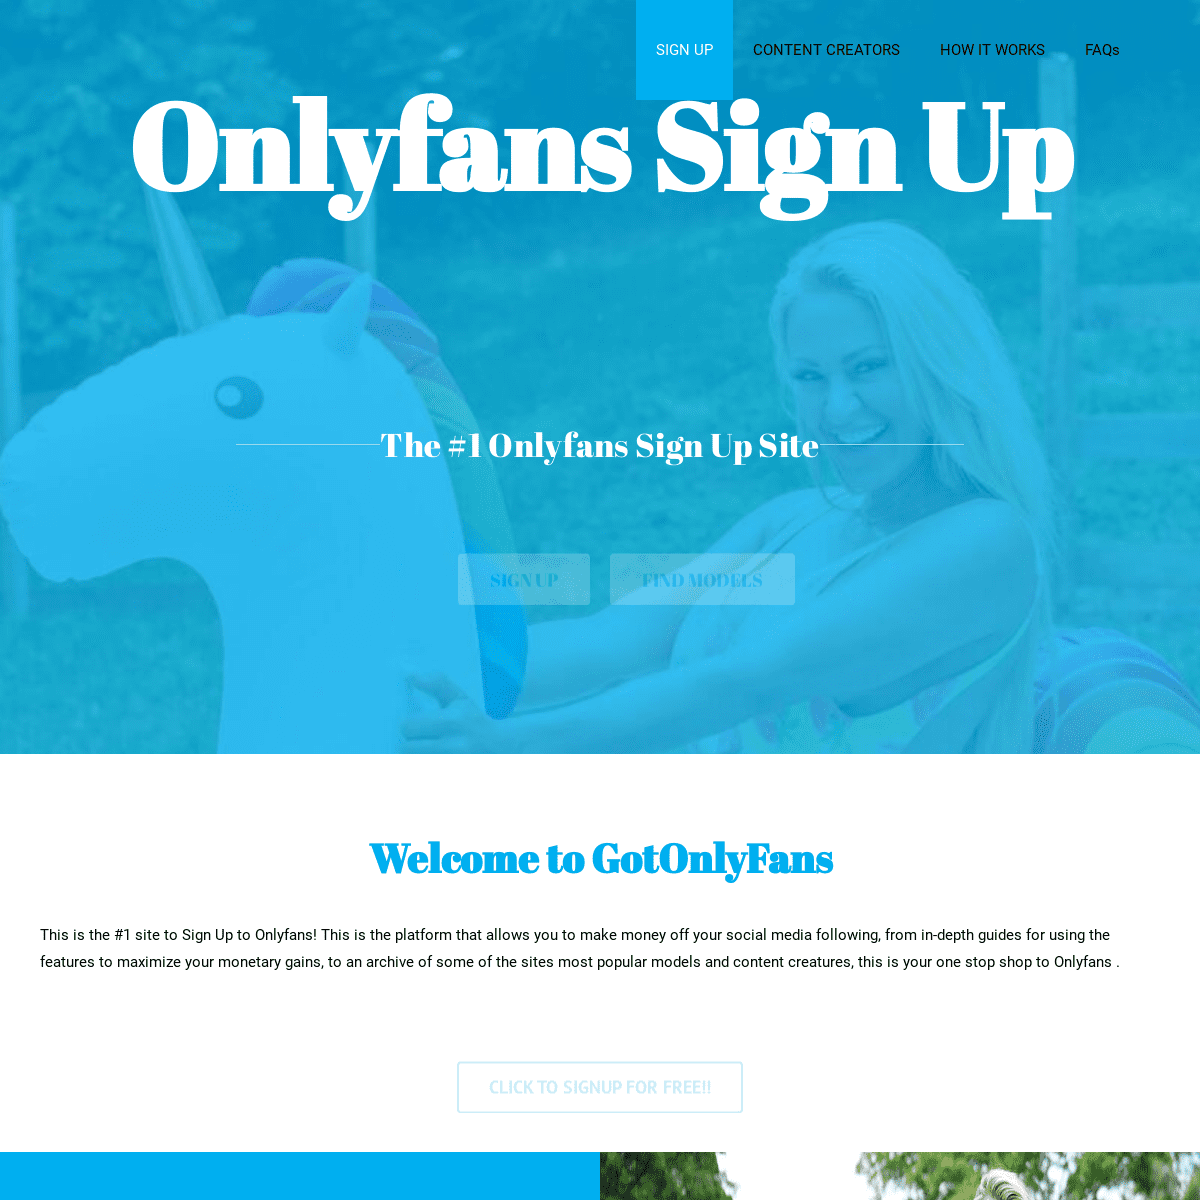 A complete backup of https://www.gotonlyfans.com/